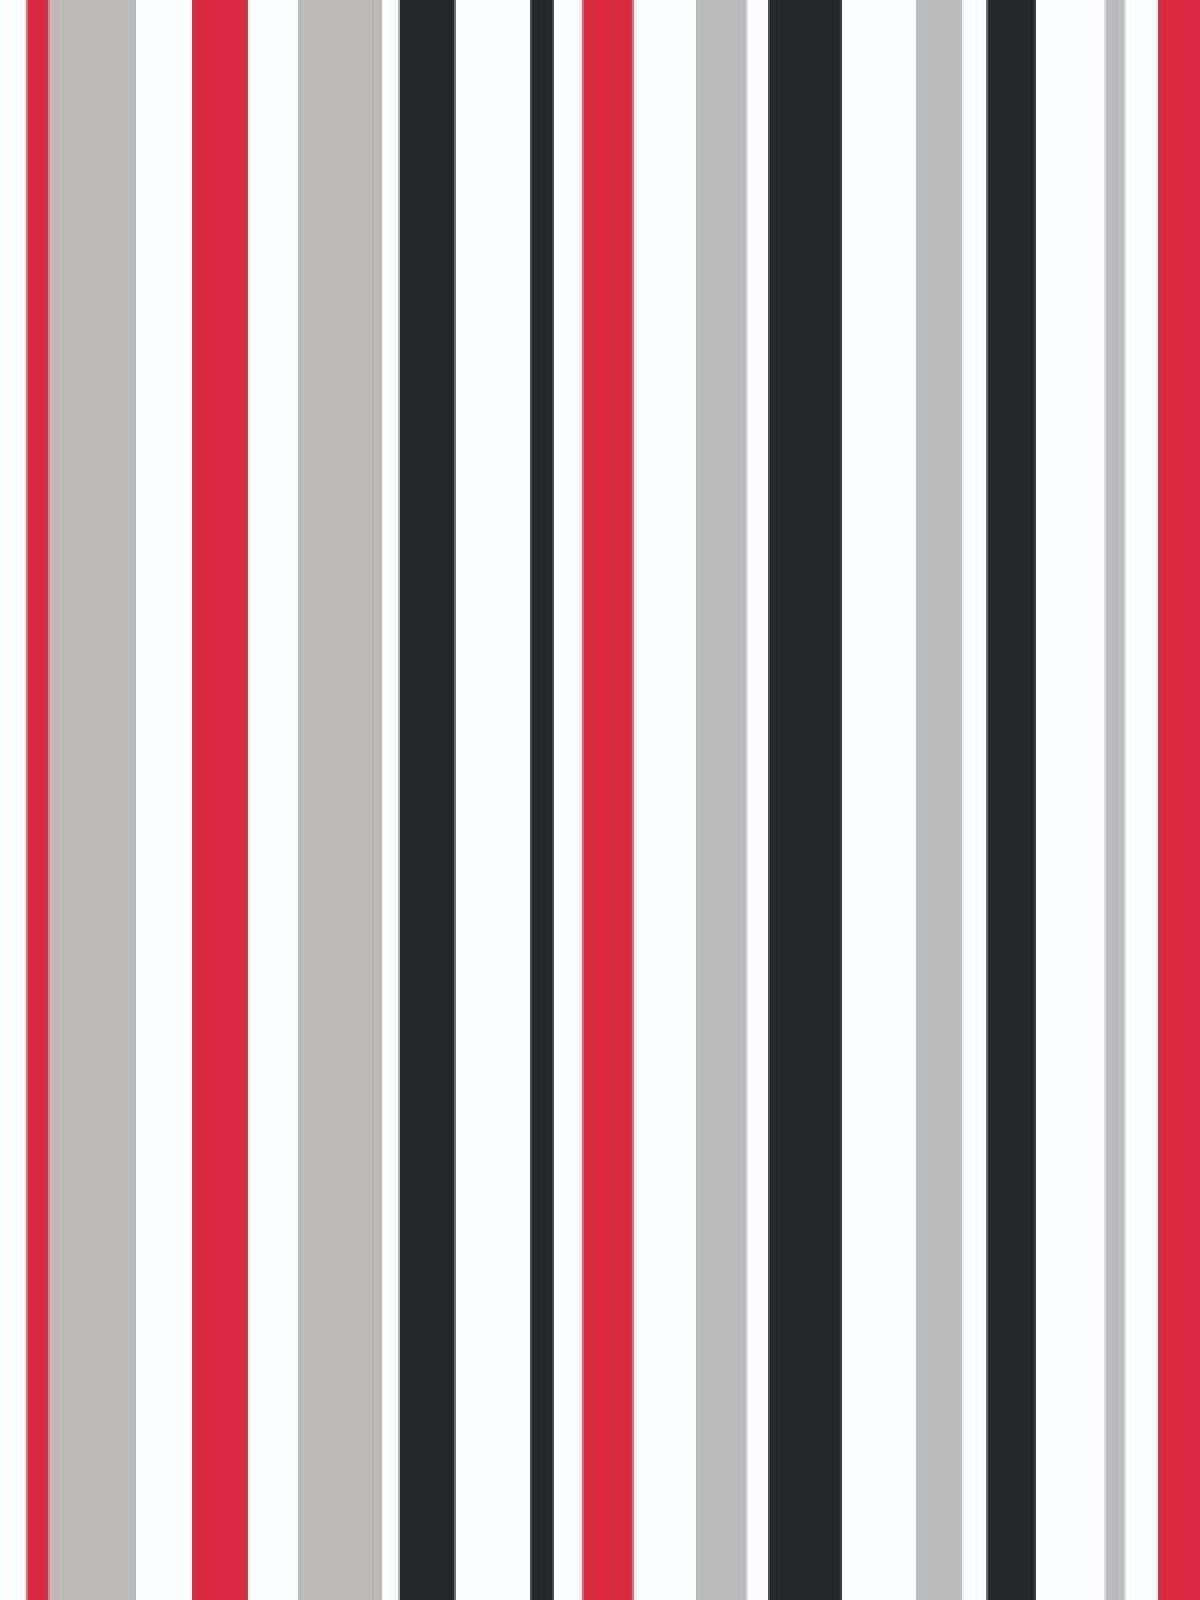 Bold Red, Black, and White Graphic Art